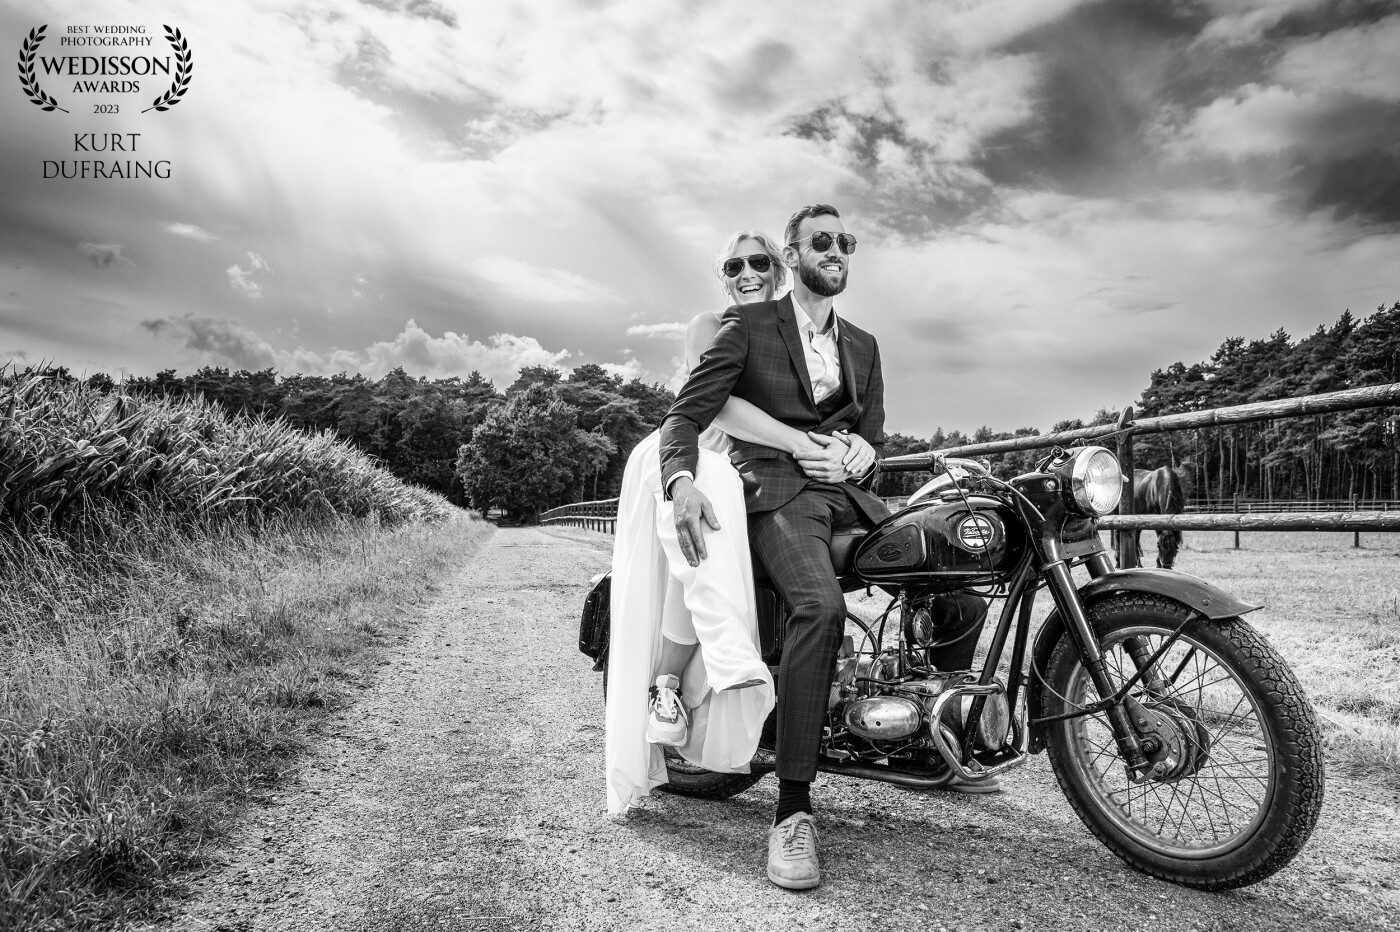 This beautiful location was close to the backyard of the bridal couple. The man had made up a motorcycle by himself, which we used for the photo shoot. It makes him extra proud of this photo and makes the photo something very personal for the couple.